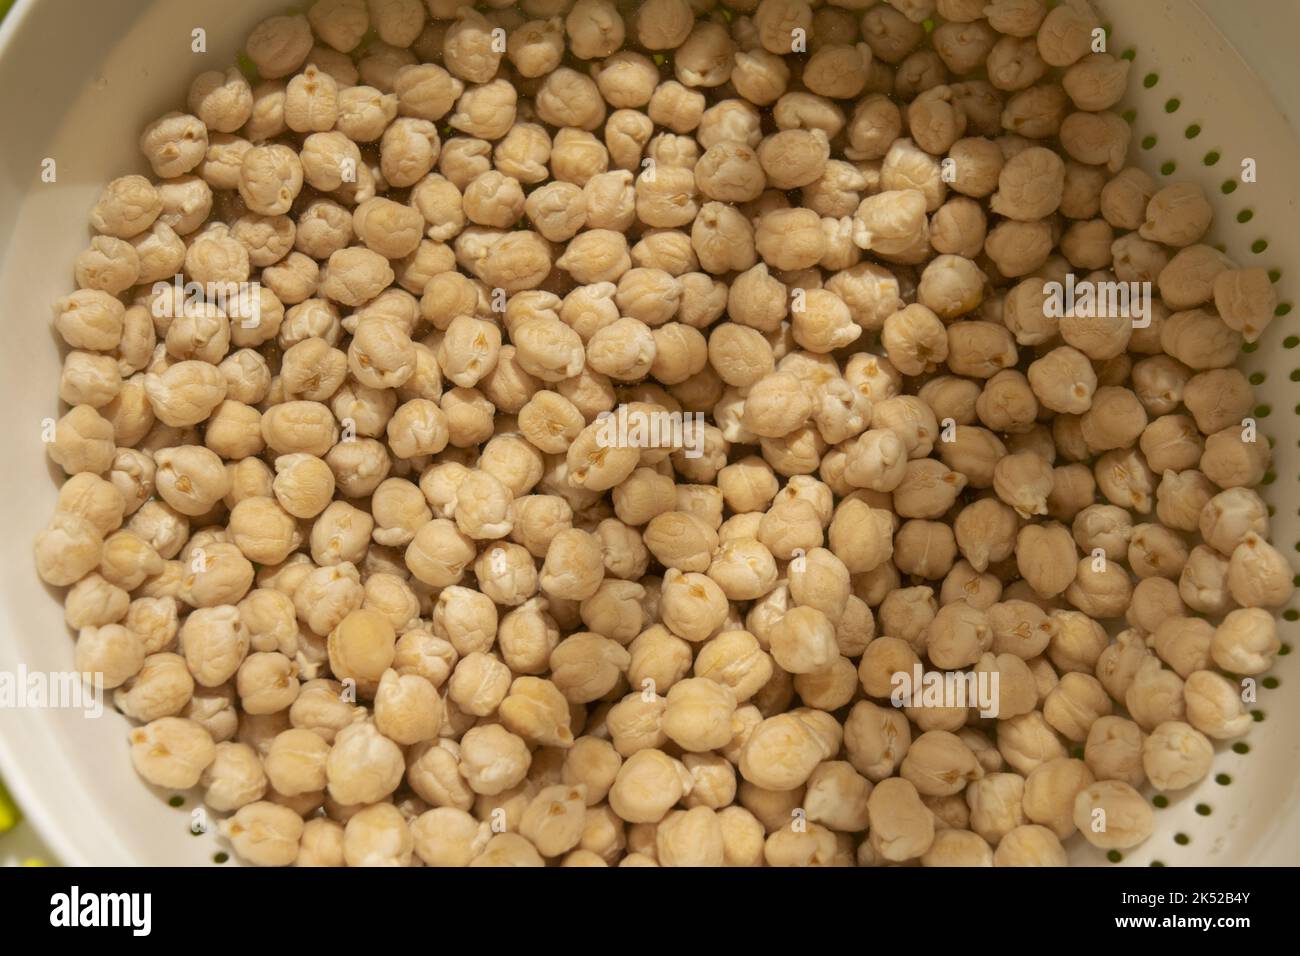 chickpeas soaking in water in a plastic bowl Stock Photo